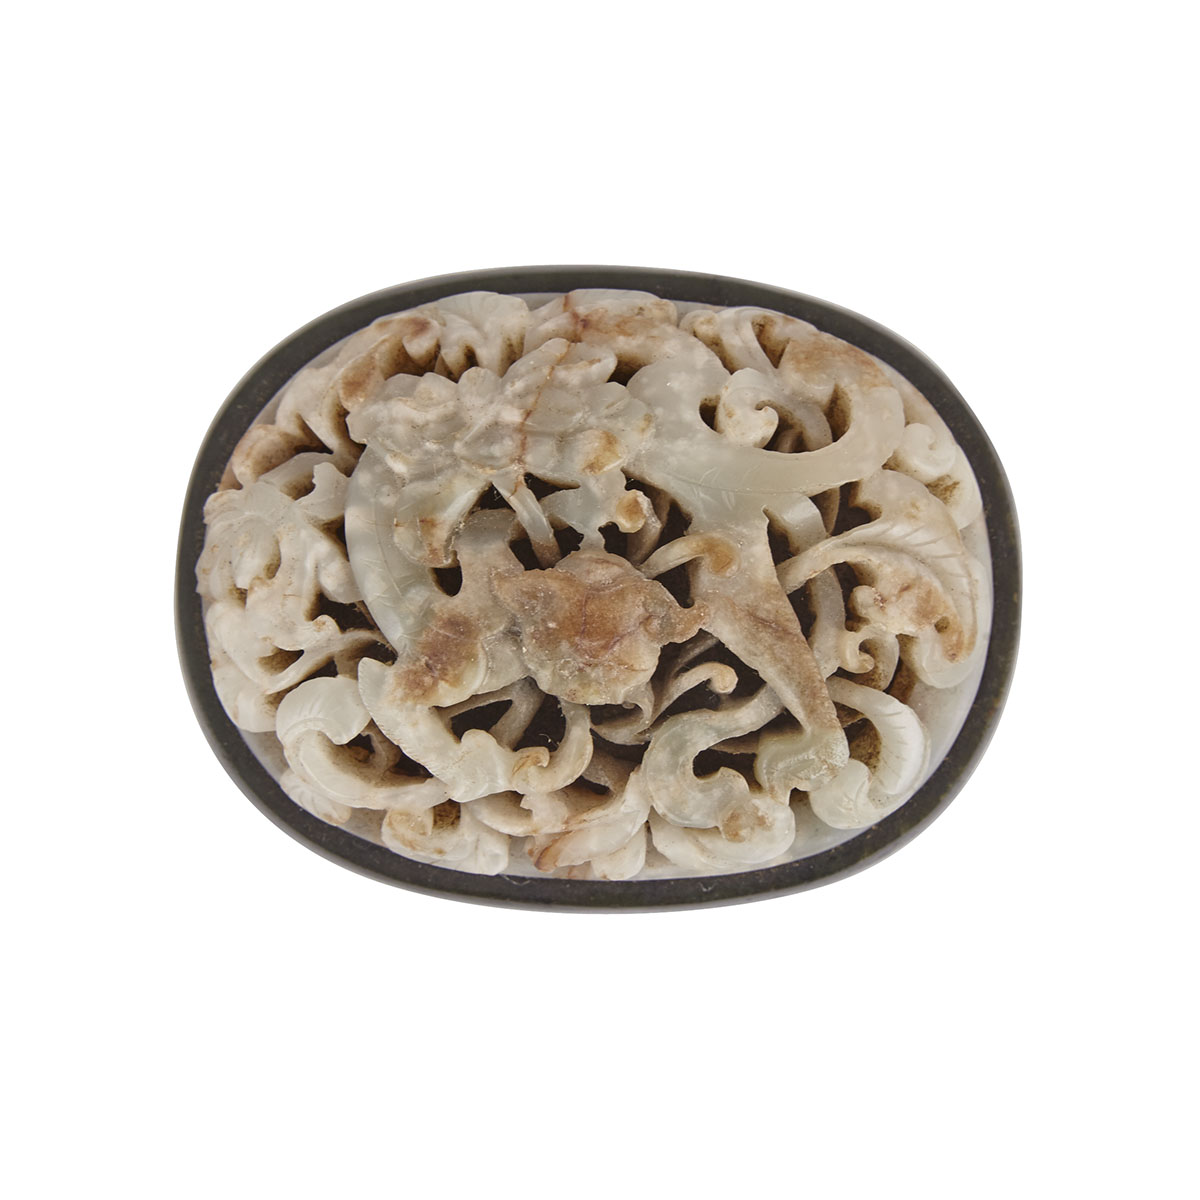 A Rare Pale Celadon and Russet Jade Belt Buckle, Yuen to Ming Dynasty (1279-1644)